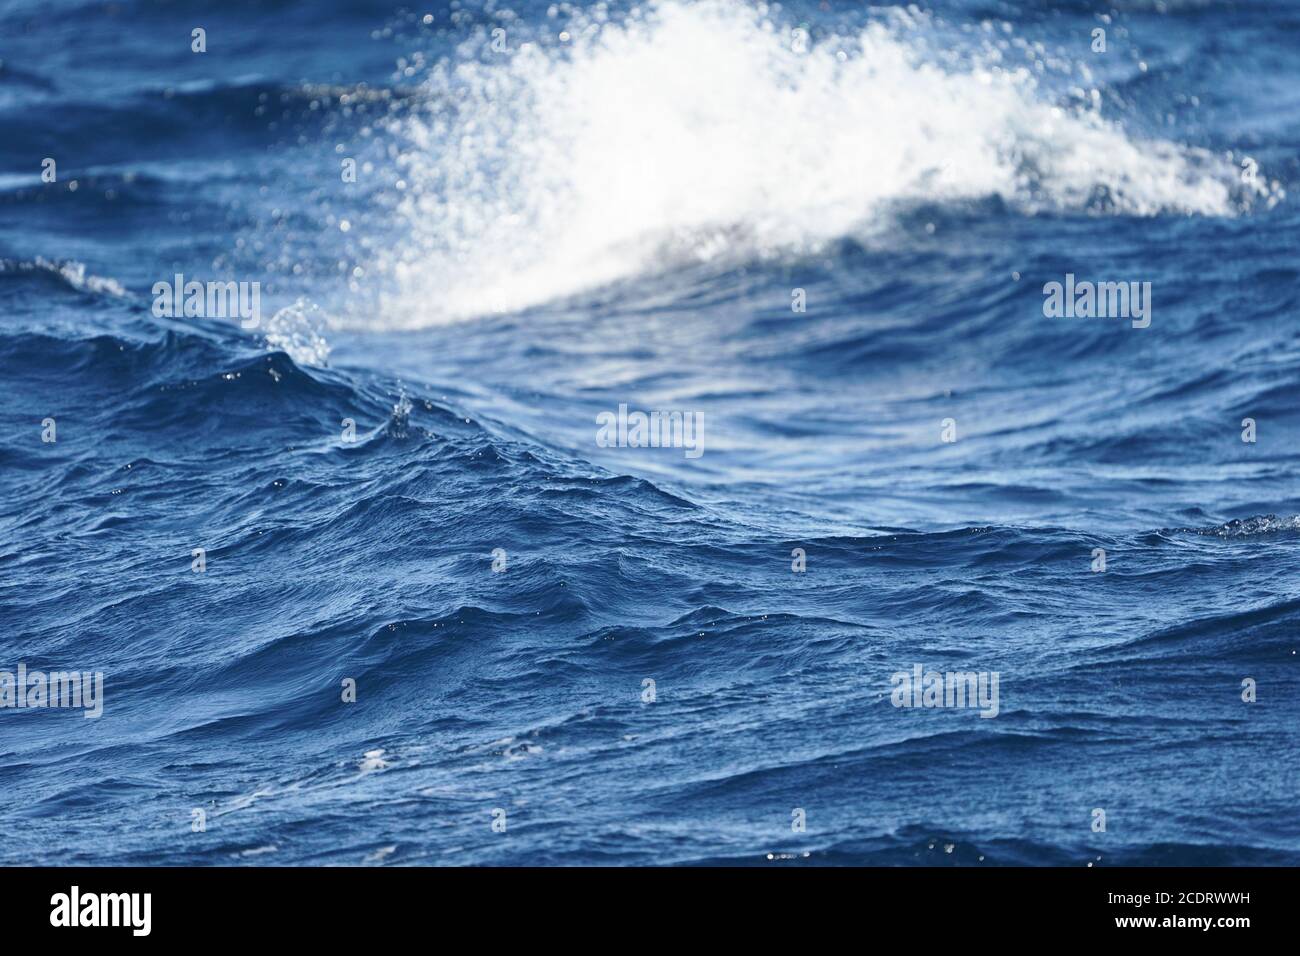 Waves on open sea, Andalusia, Spain. Stock Photo